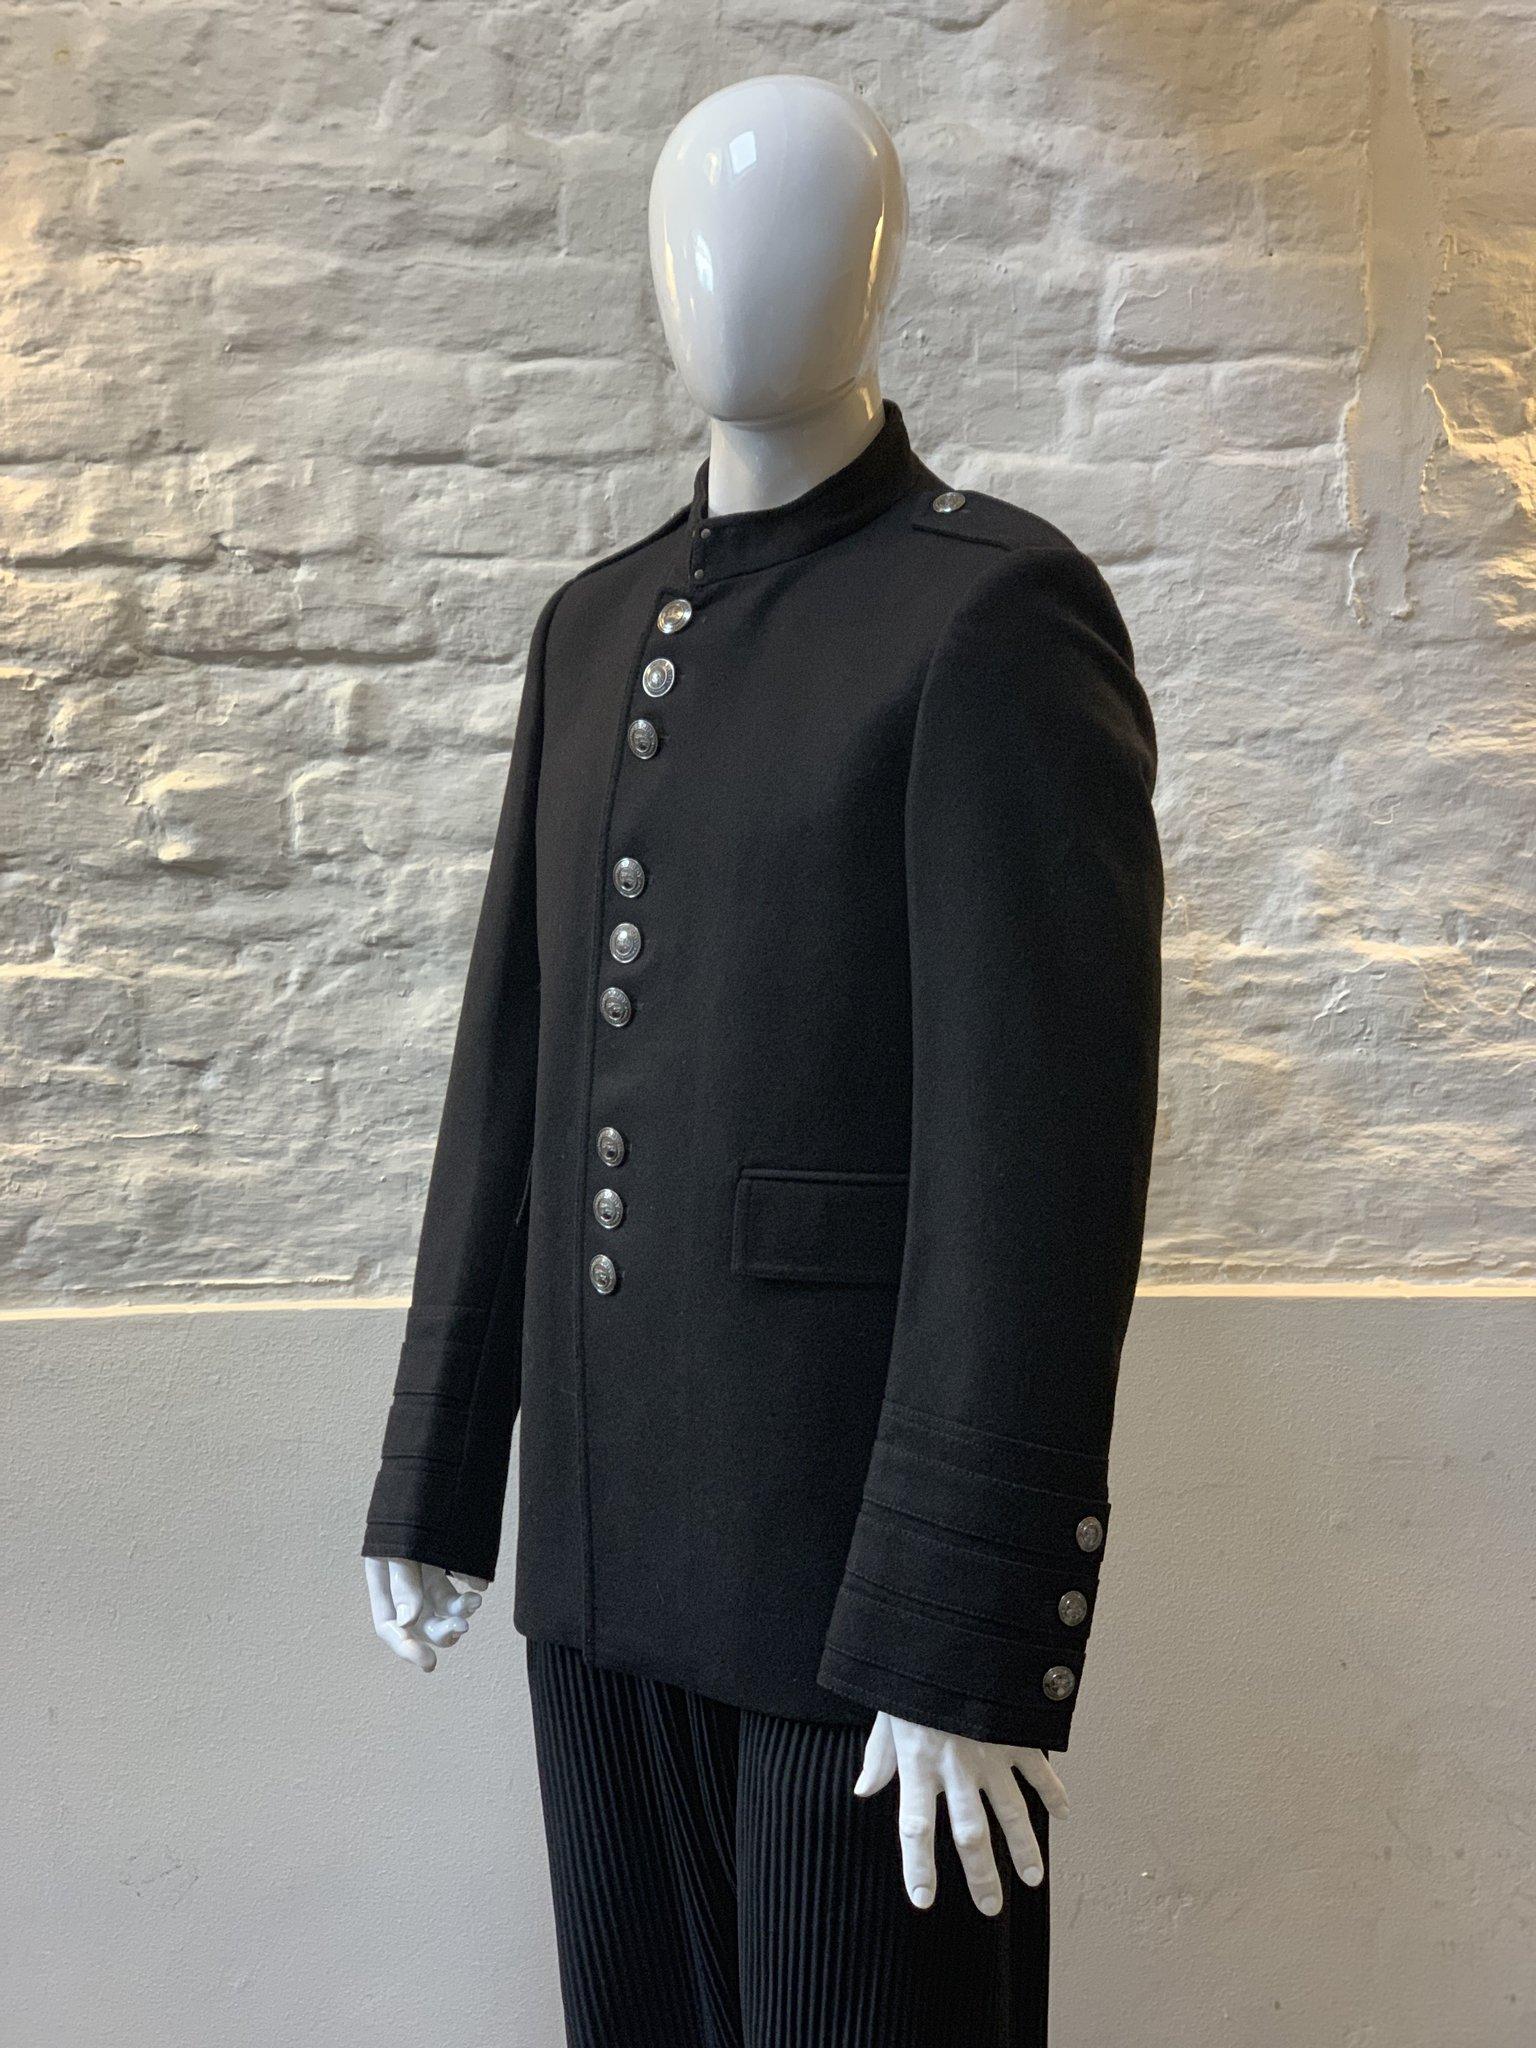 Burberry Military Jacket made in the UK from wool. 

A quintessentially British heritage brand, Burberry has continued to be an iconic and innovative brand since it was established in 1856. Gabardine, the innovative fabric used to make Burberry